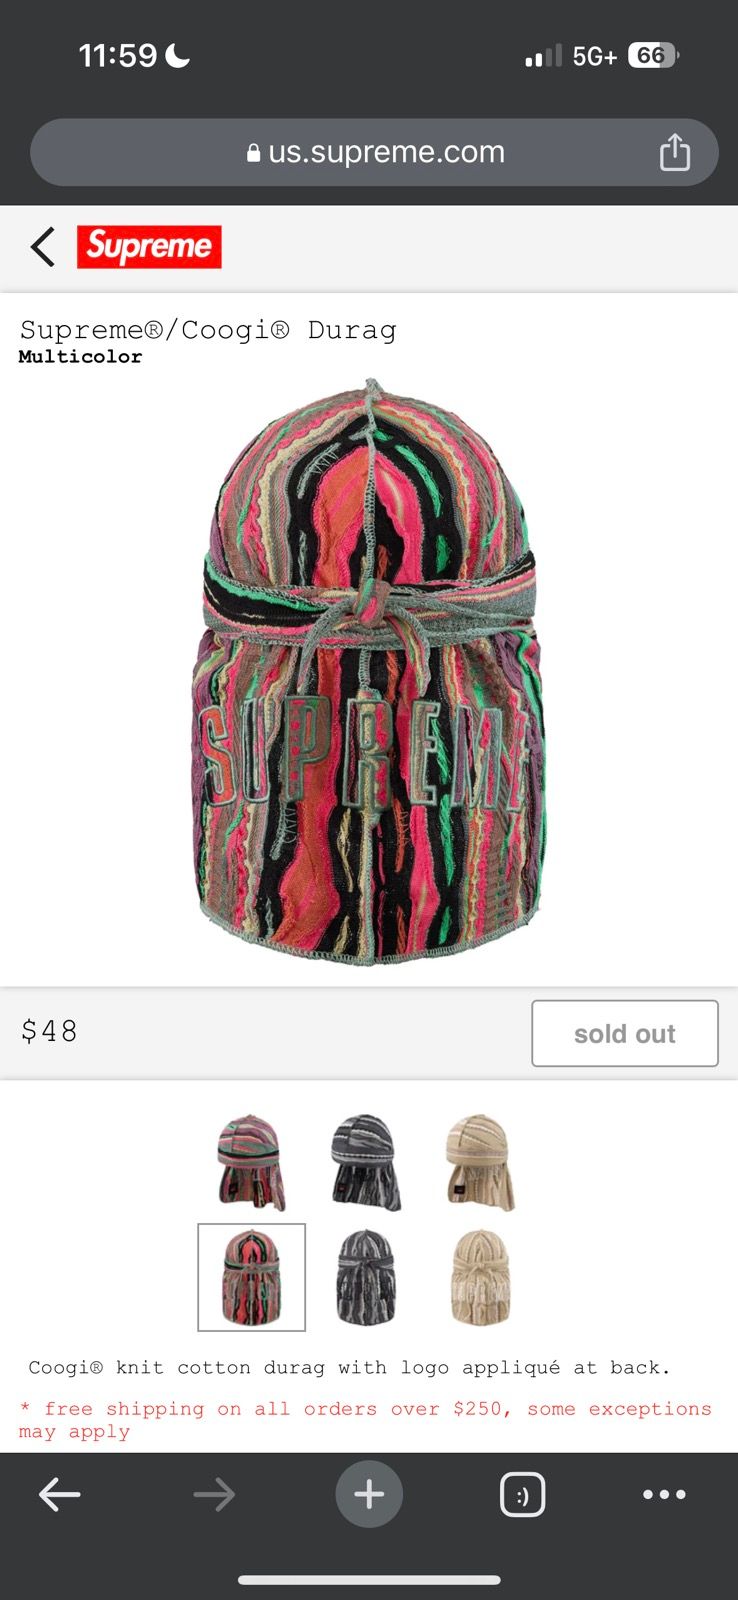 x Coogi knitted durag